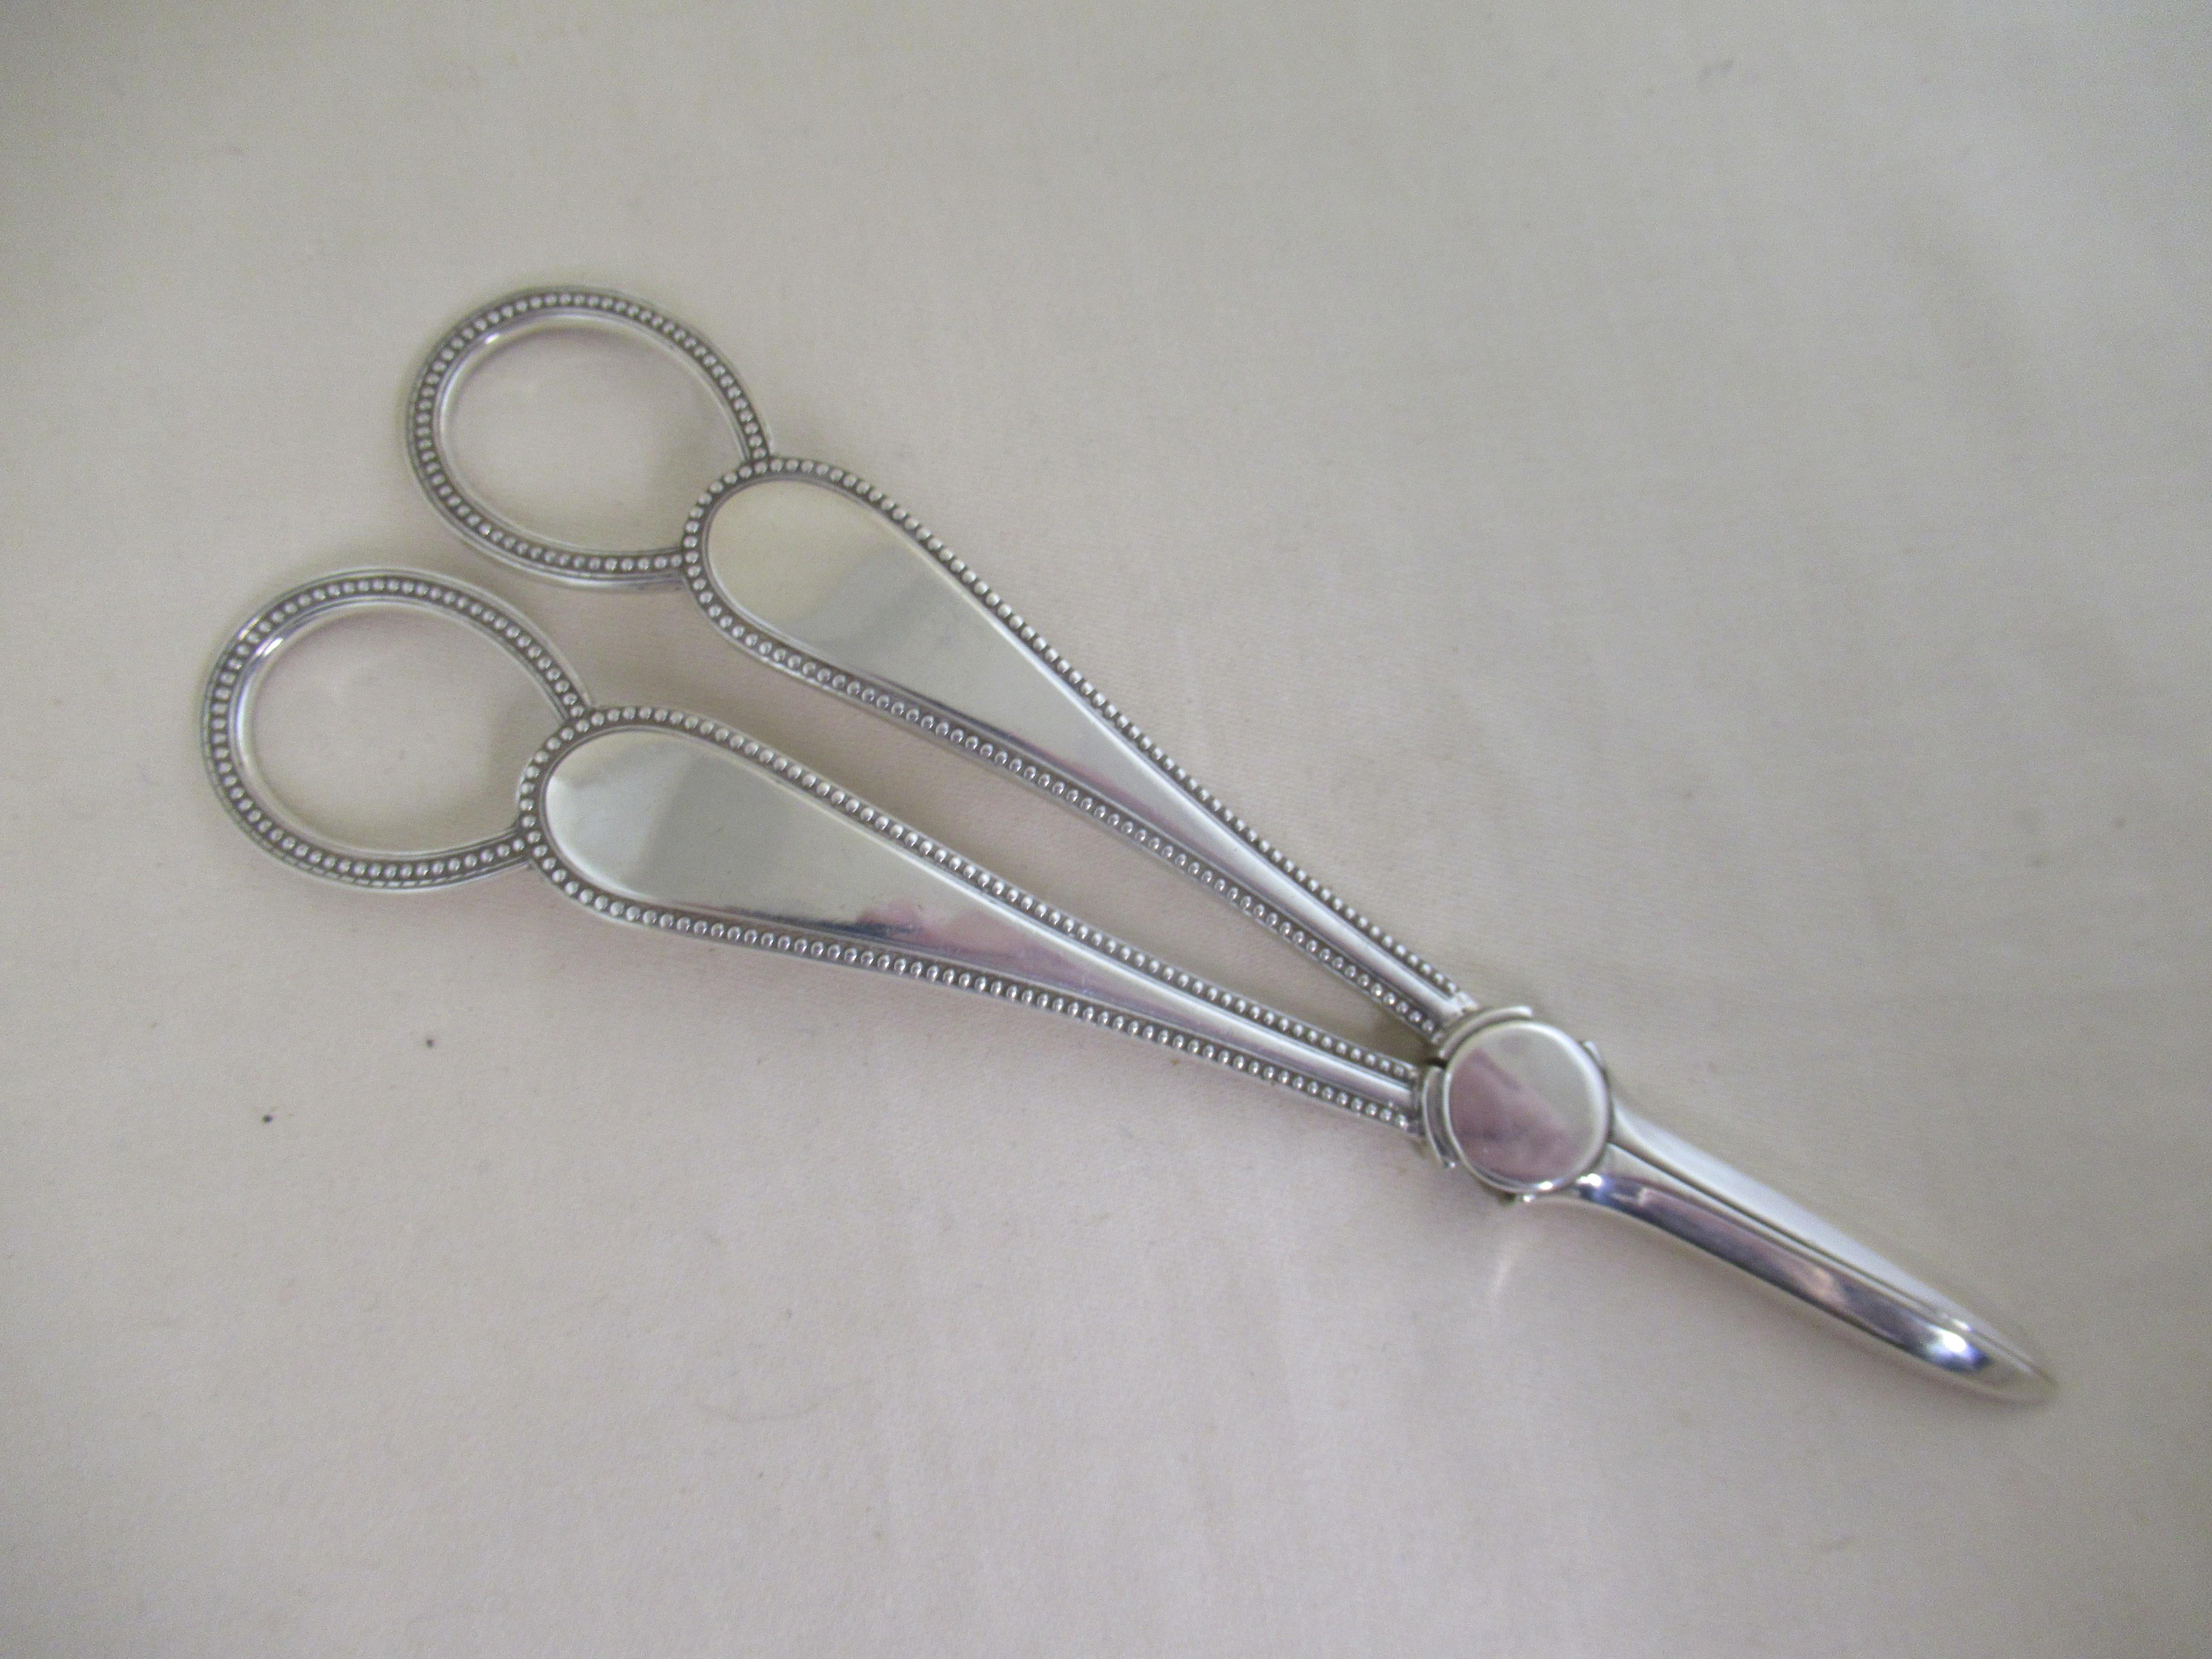 A superb pair of grape scissors or shears in the original box.
Used to cut a bunch of grapes from the vine, but also to grip the cut stem so that the bunch can be lifted down, carefully.

Made in 1897, and with a full set of English hallmarks